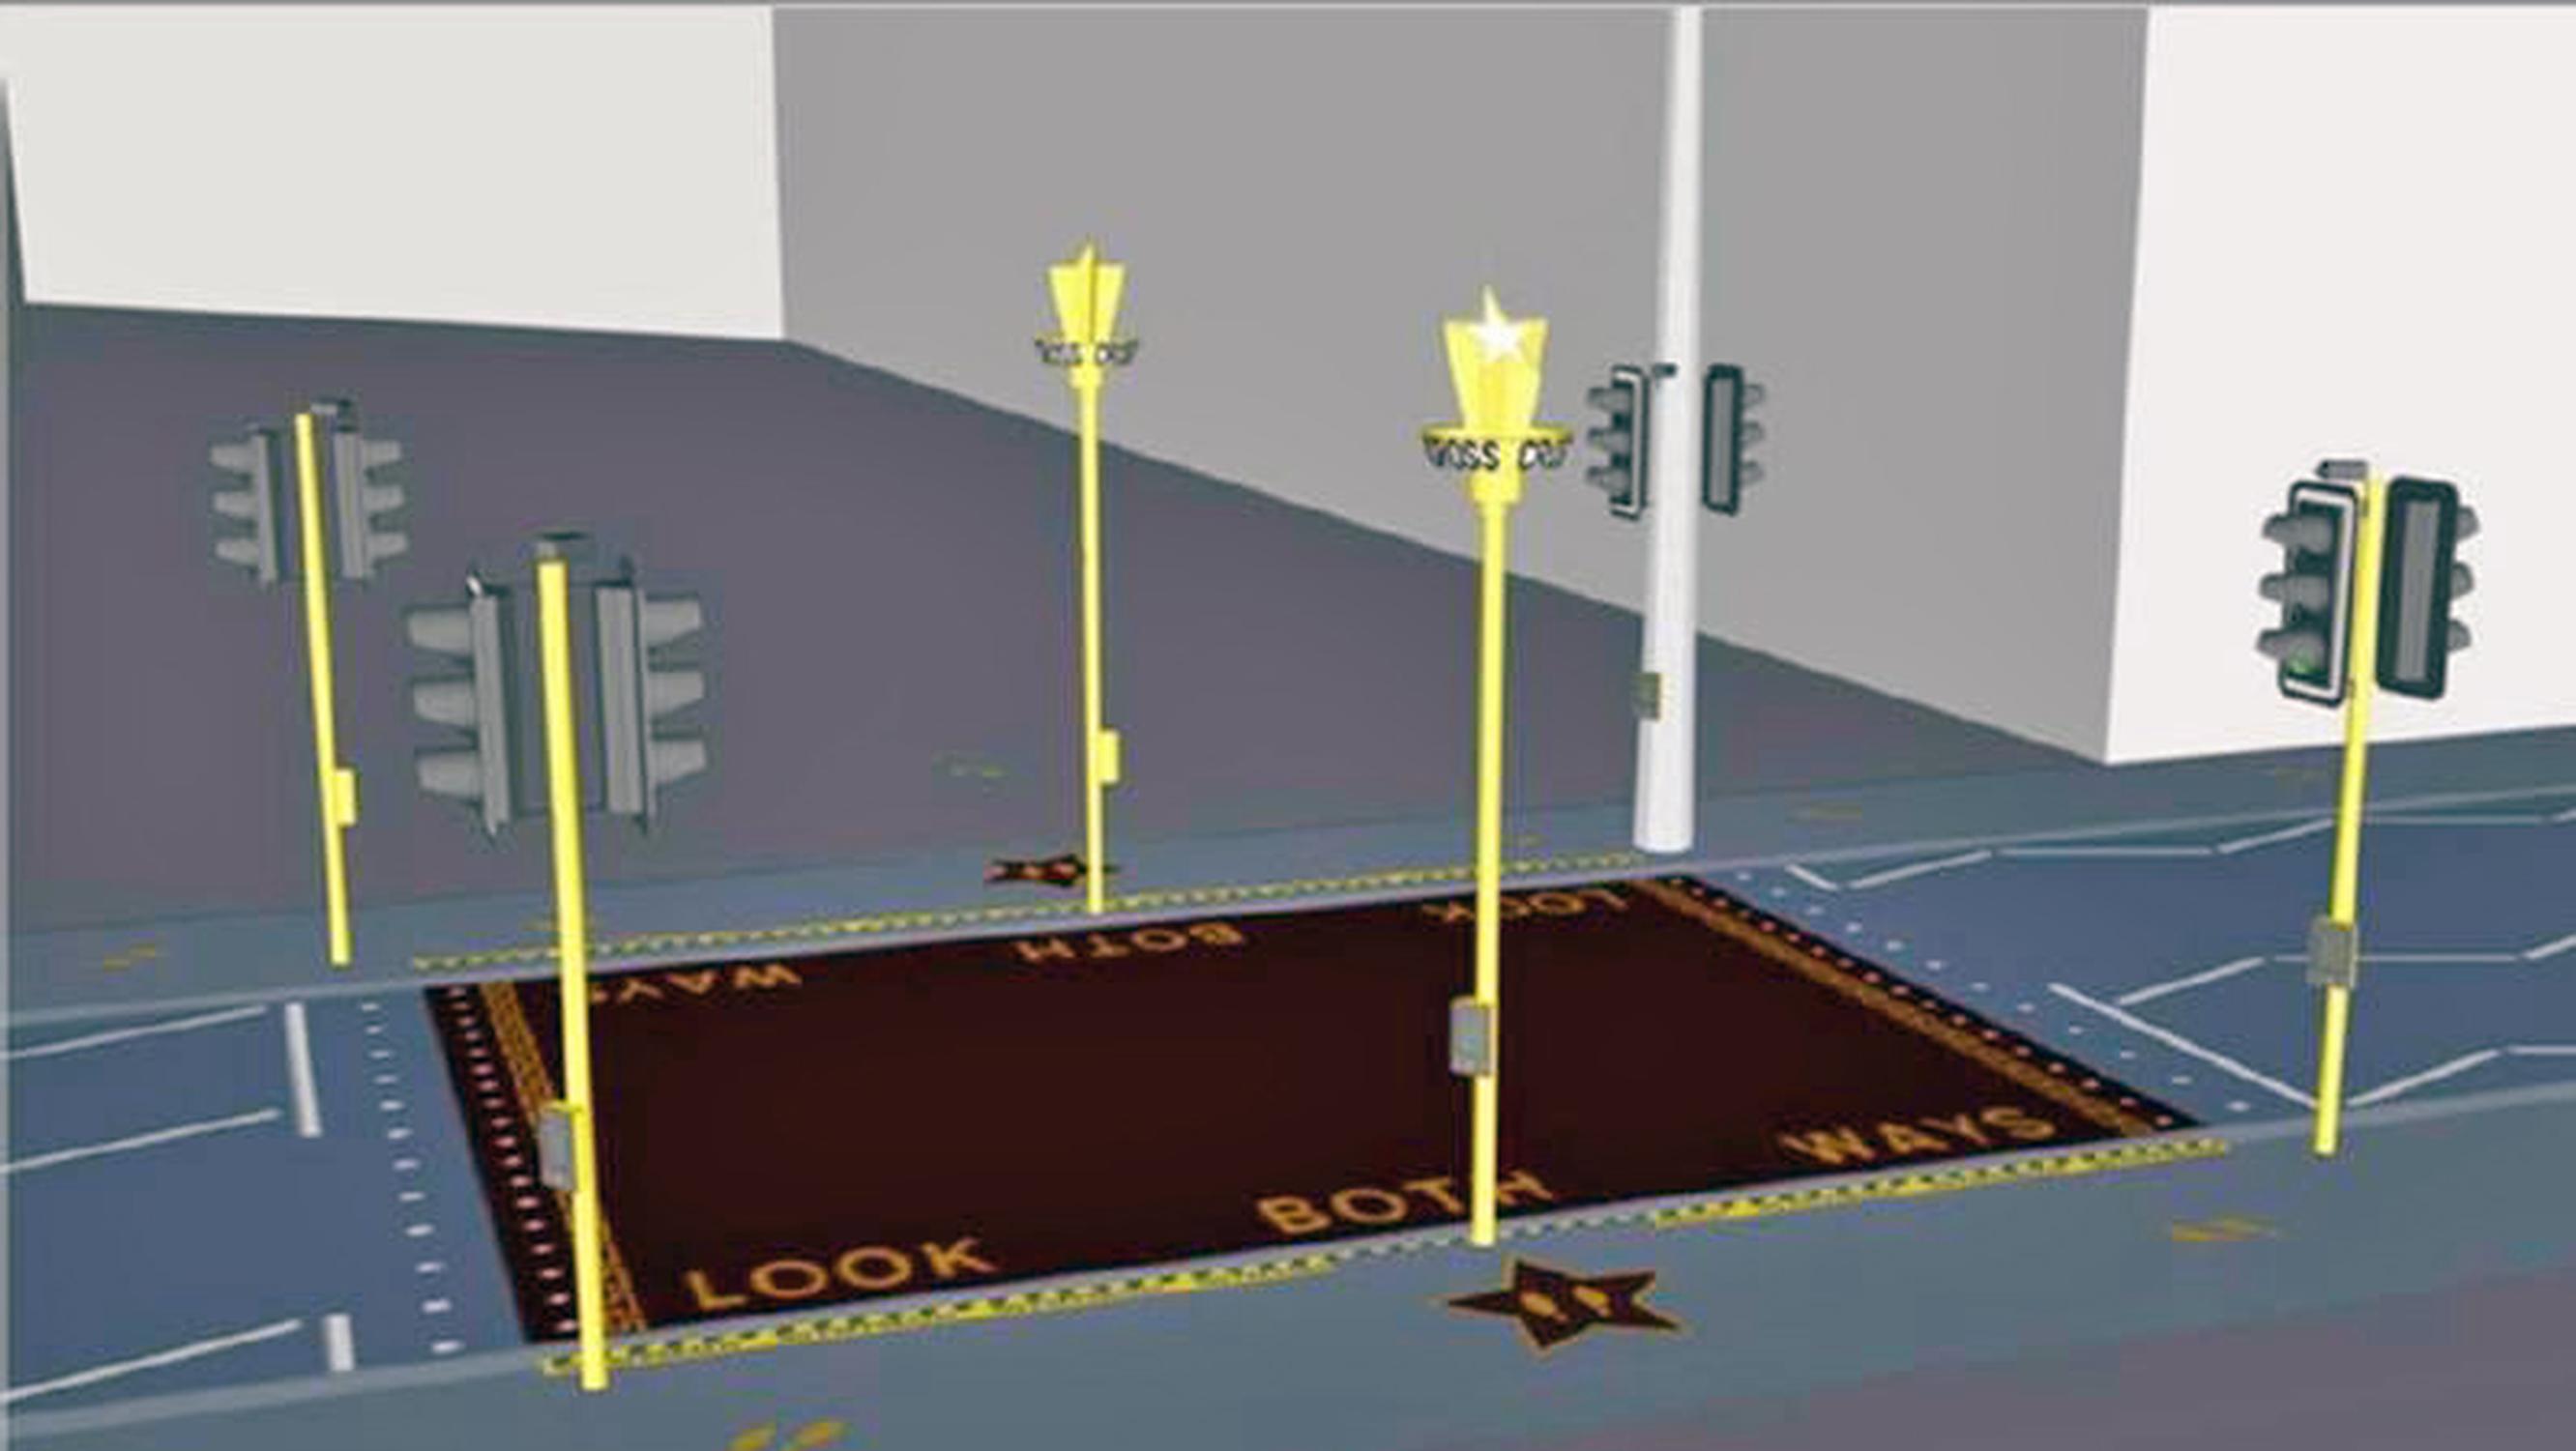 How the Gold Standard crossing design may look. Projector lights could project customised patterns onto the crossing